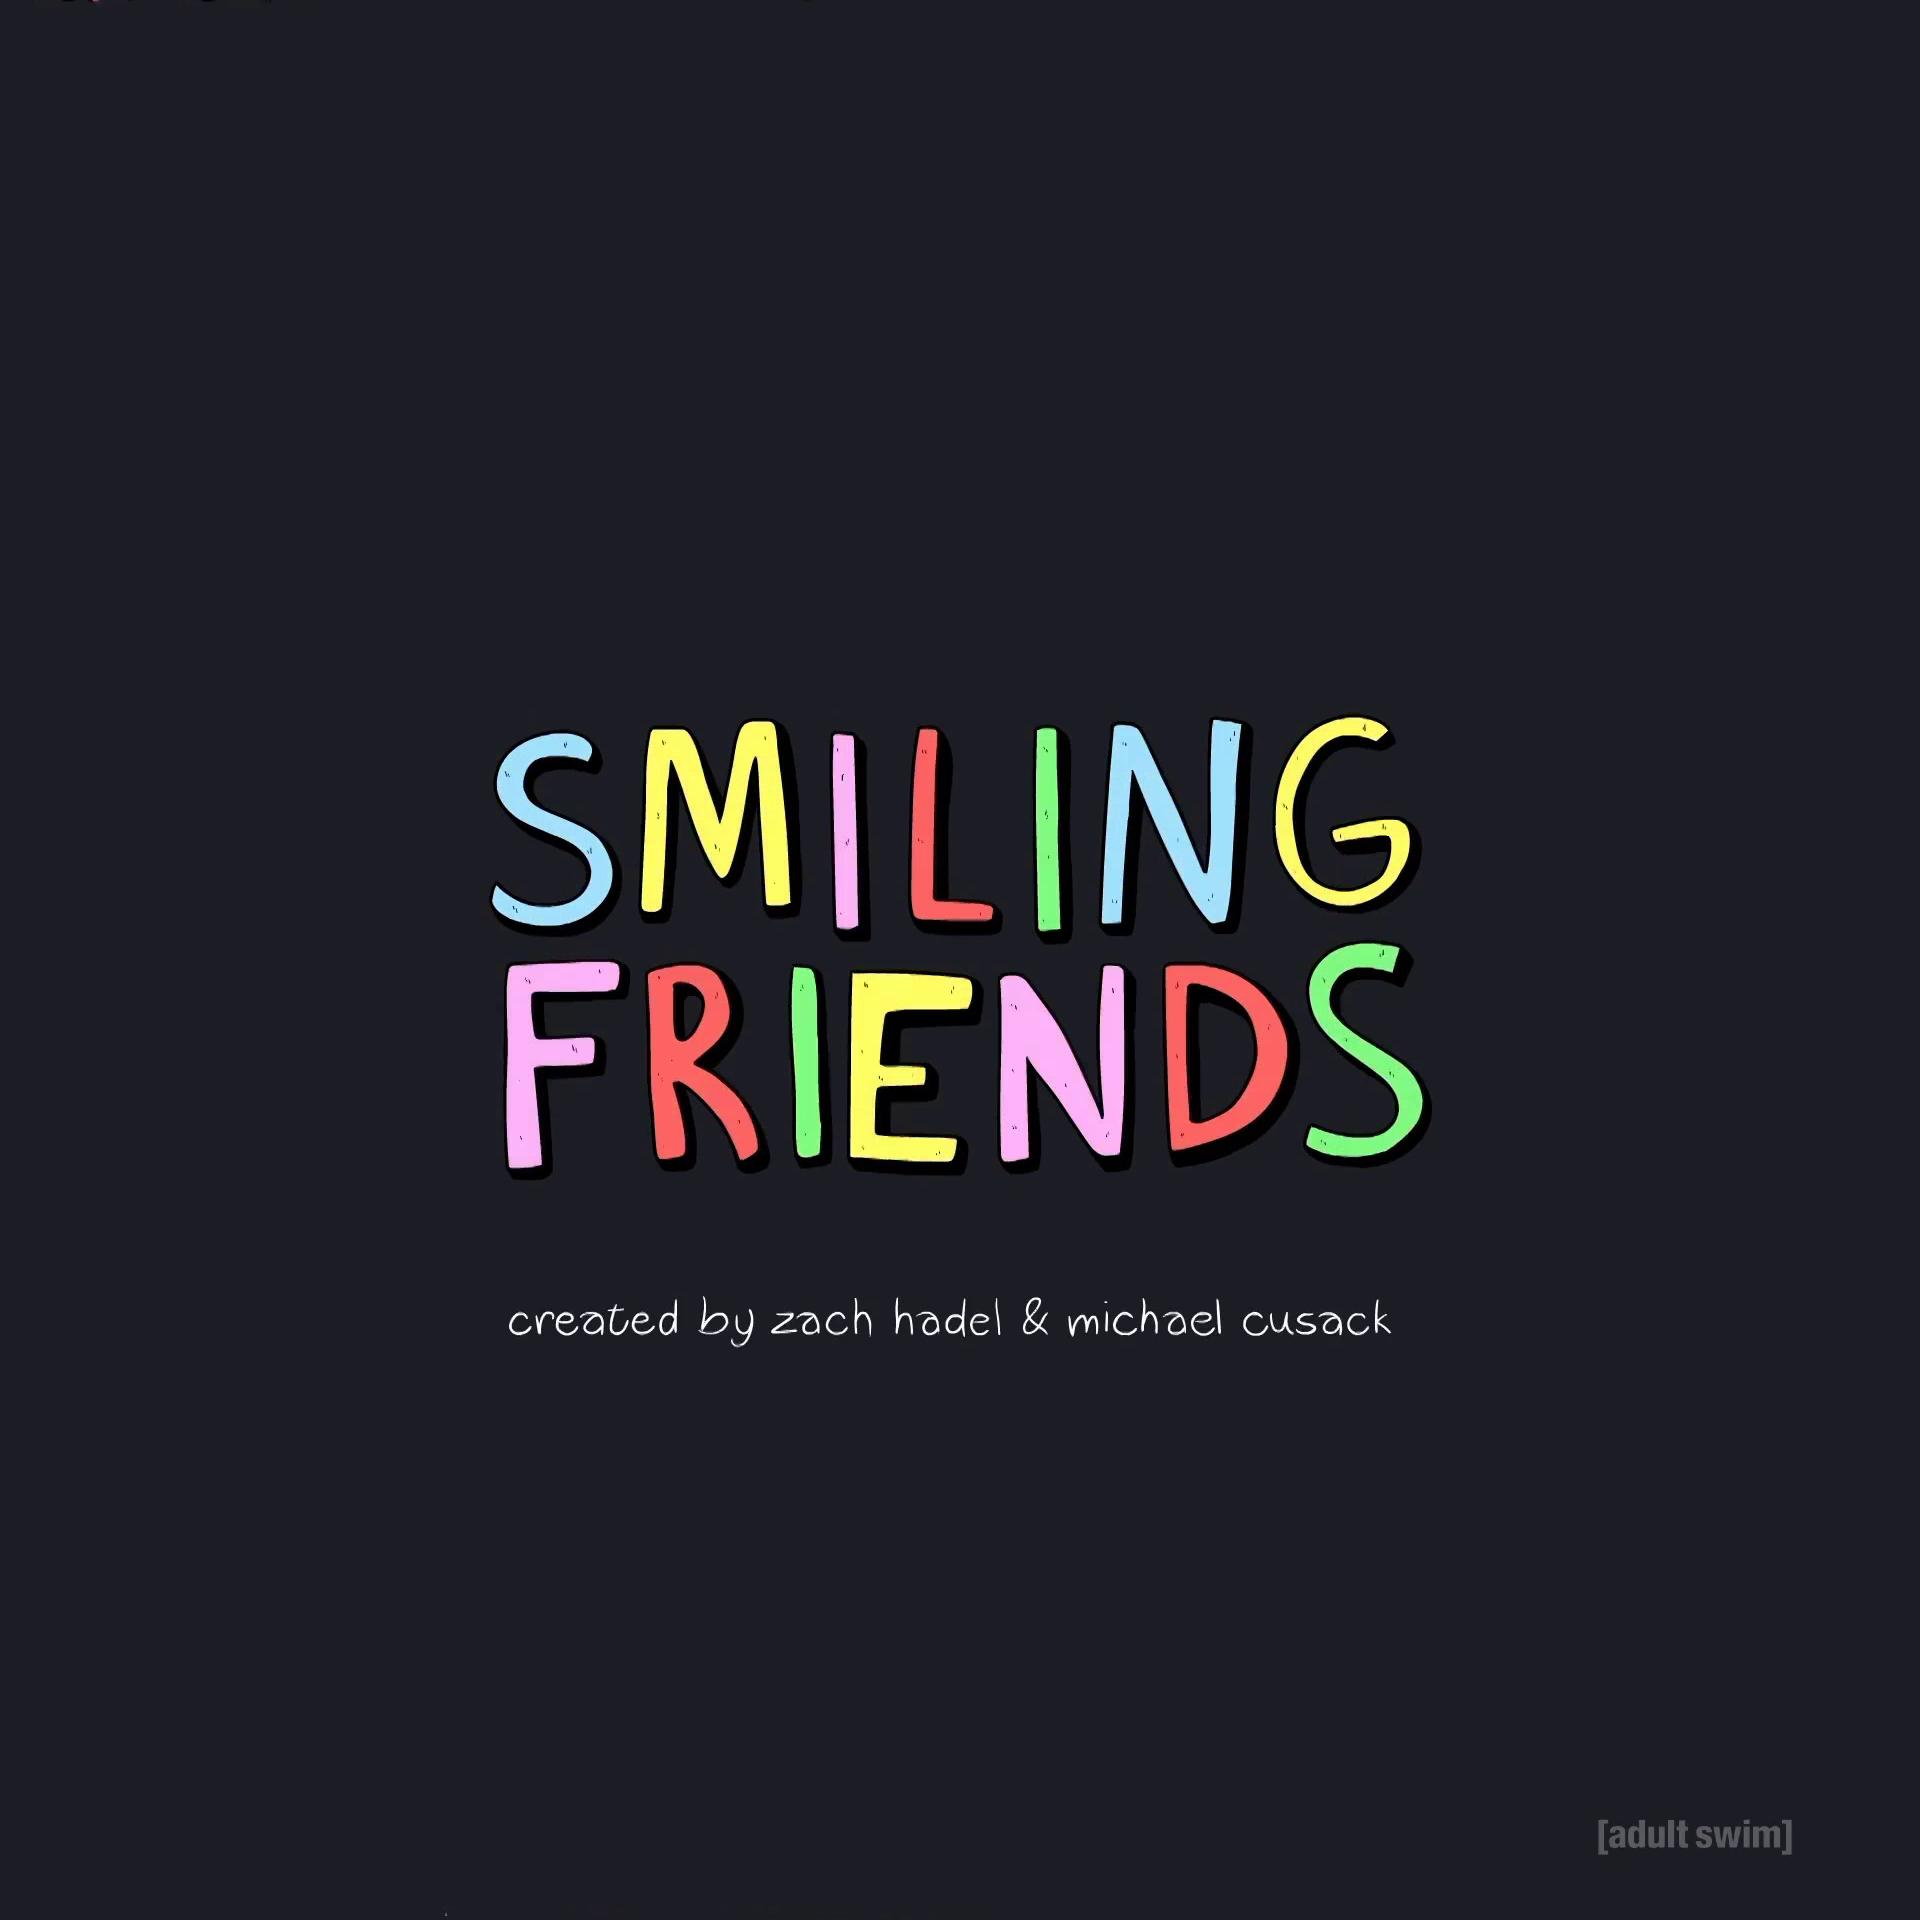 Smiling Friends Merch Launches On Adult Swim Amazon Store